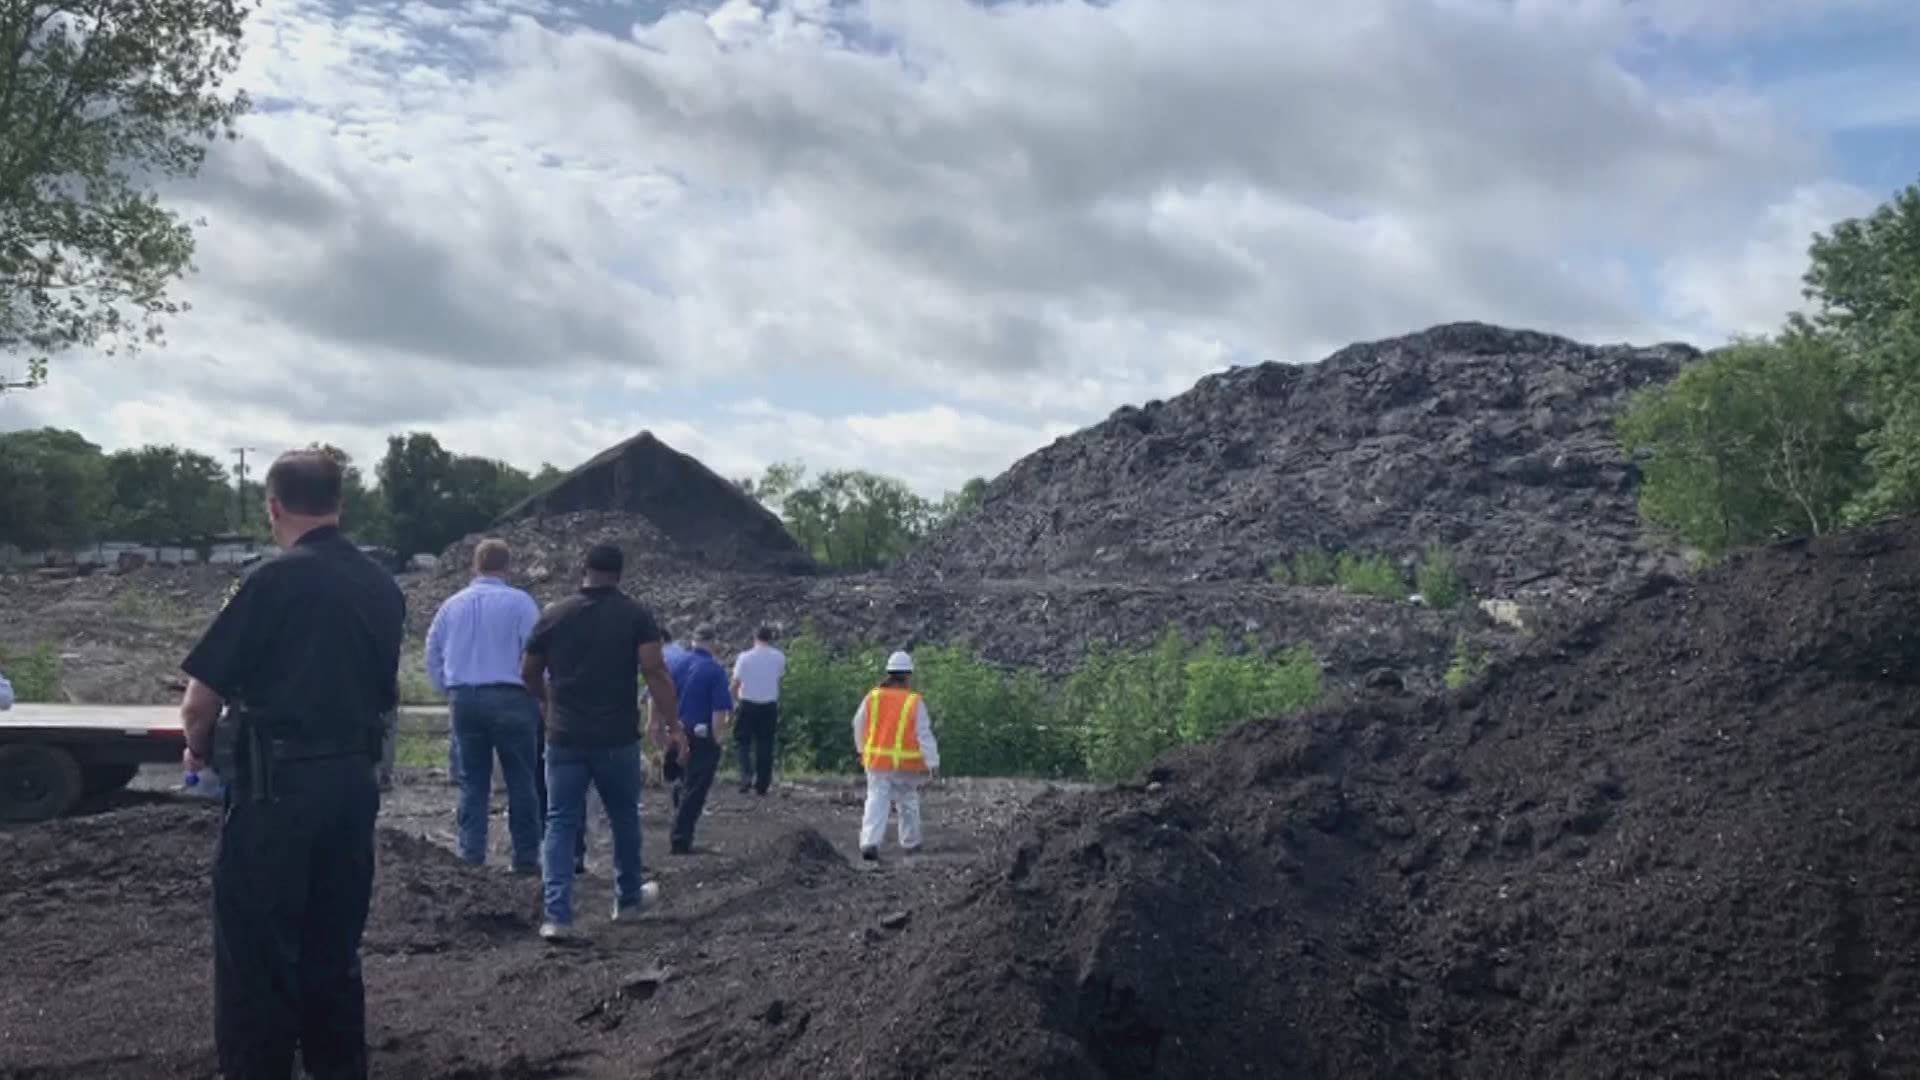 It took a trucking crew about a month and a half to remove a 150,000-ton mound of recycled shingles. Neighbors in Floral Farms said they're now breathing easier.